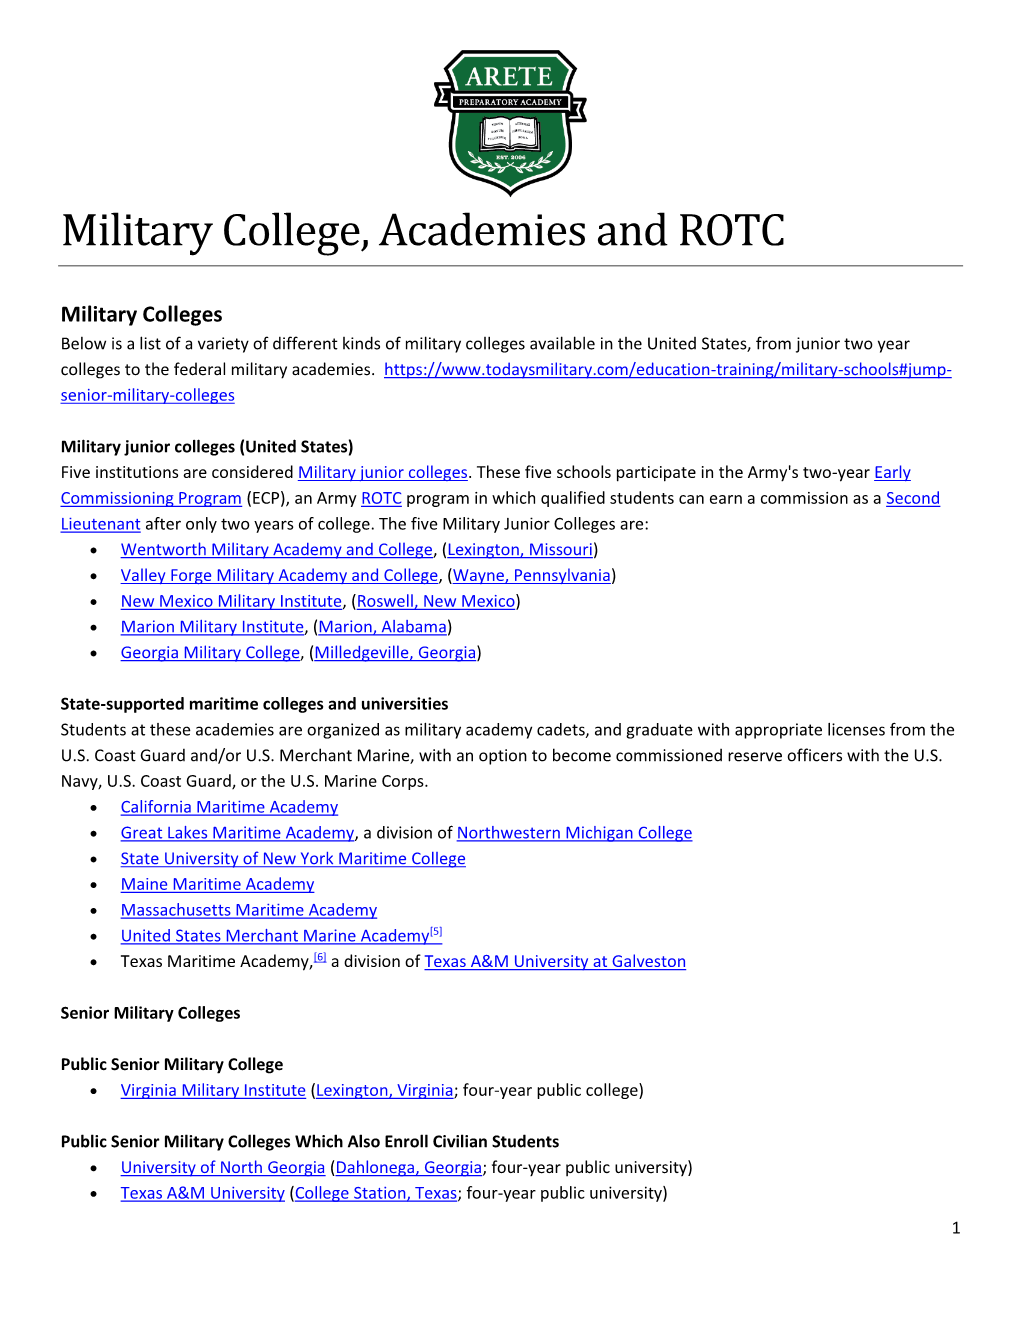 Military College, Academies, and ROTC